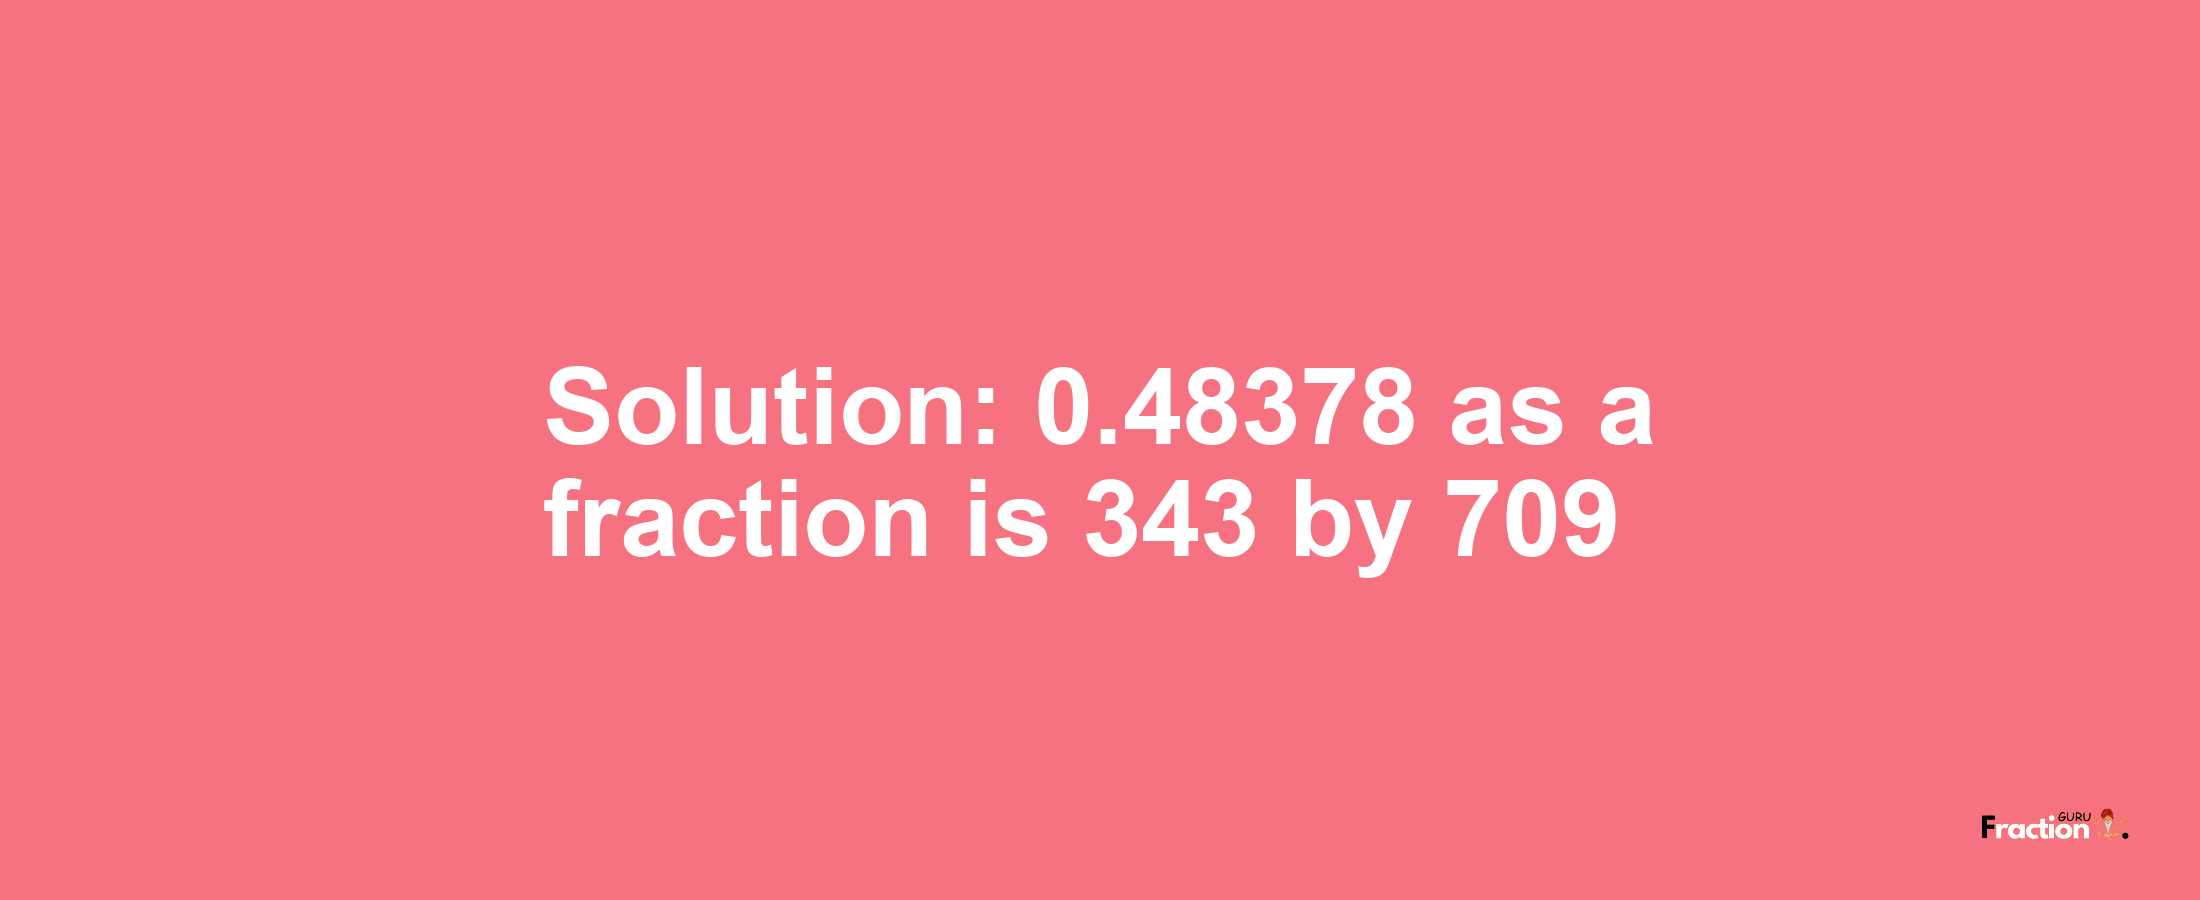 Solution:0.48378 as a fraction is 343/709